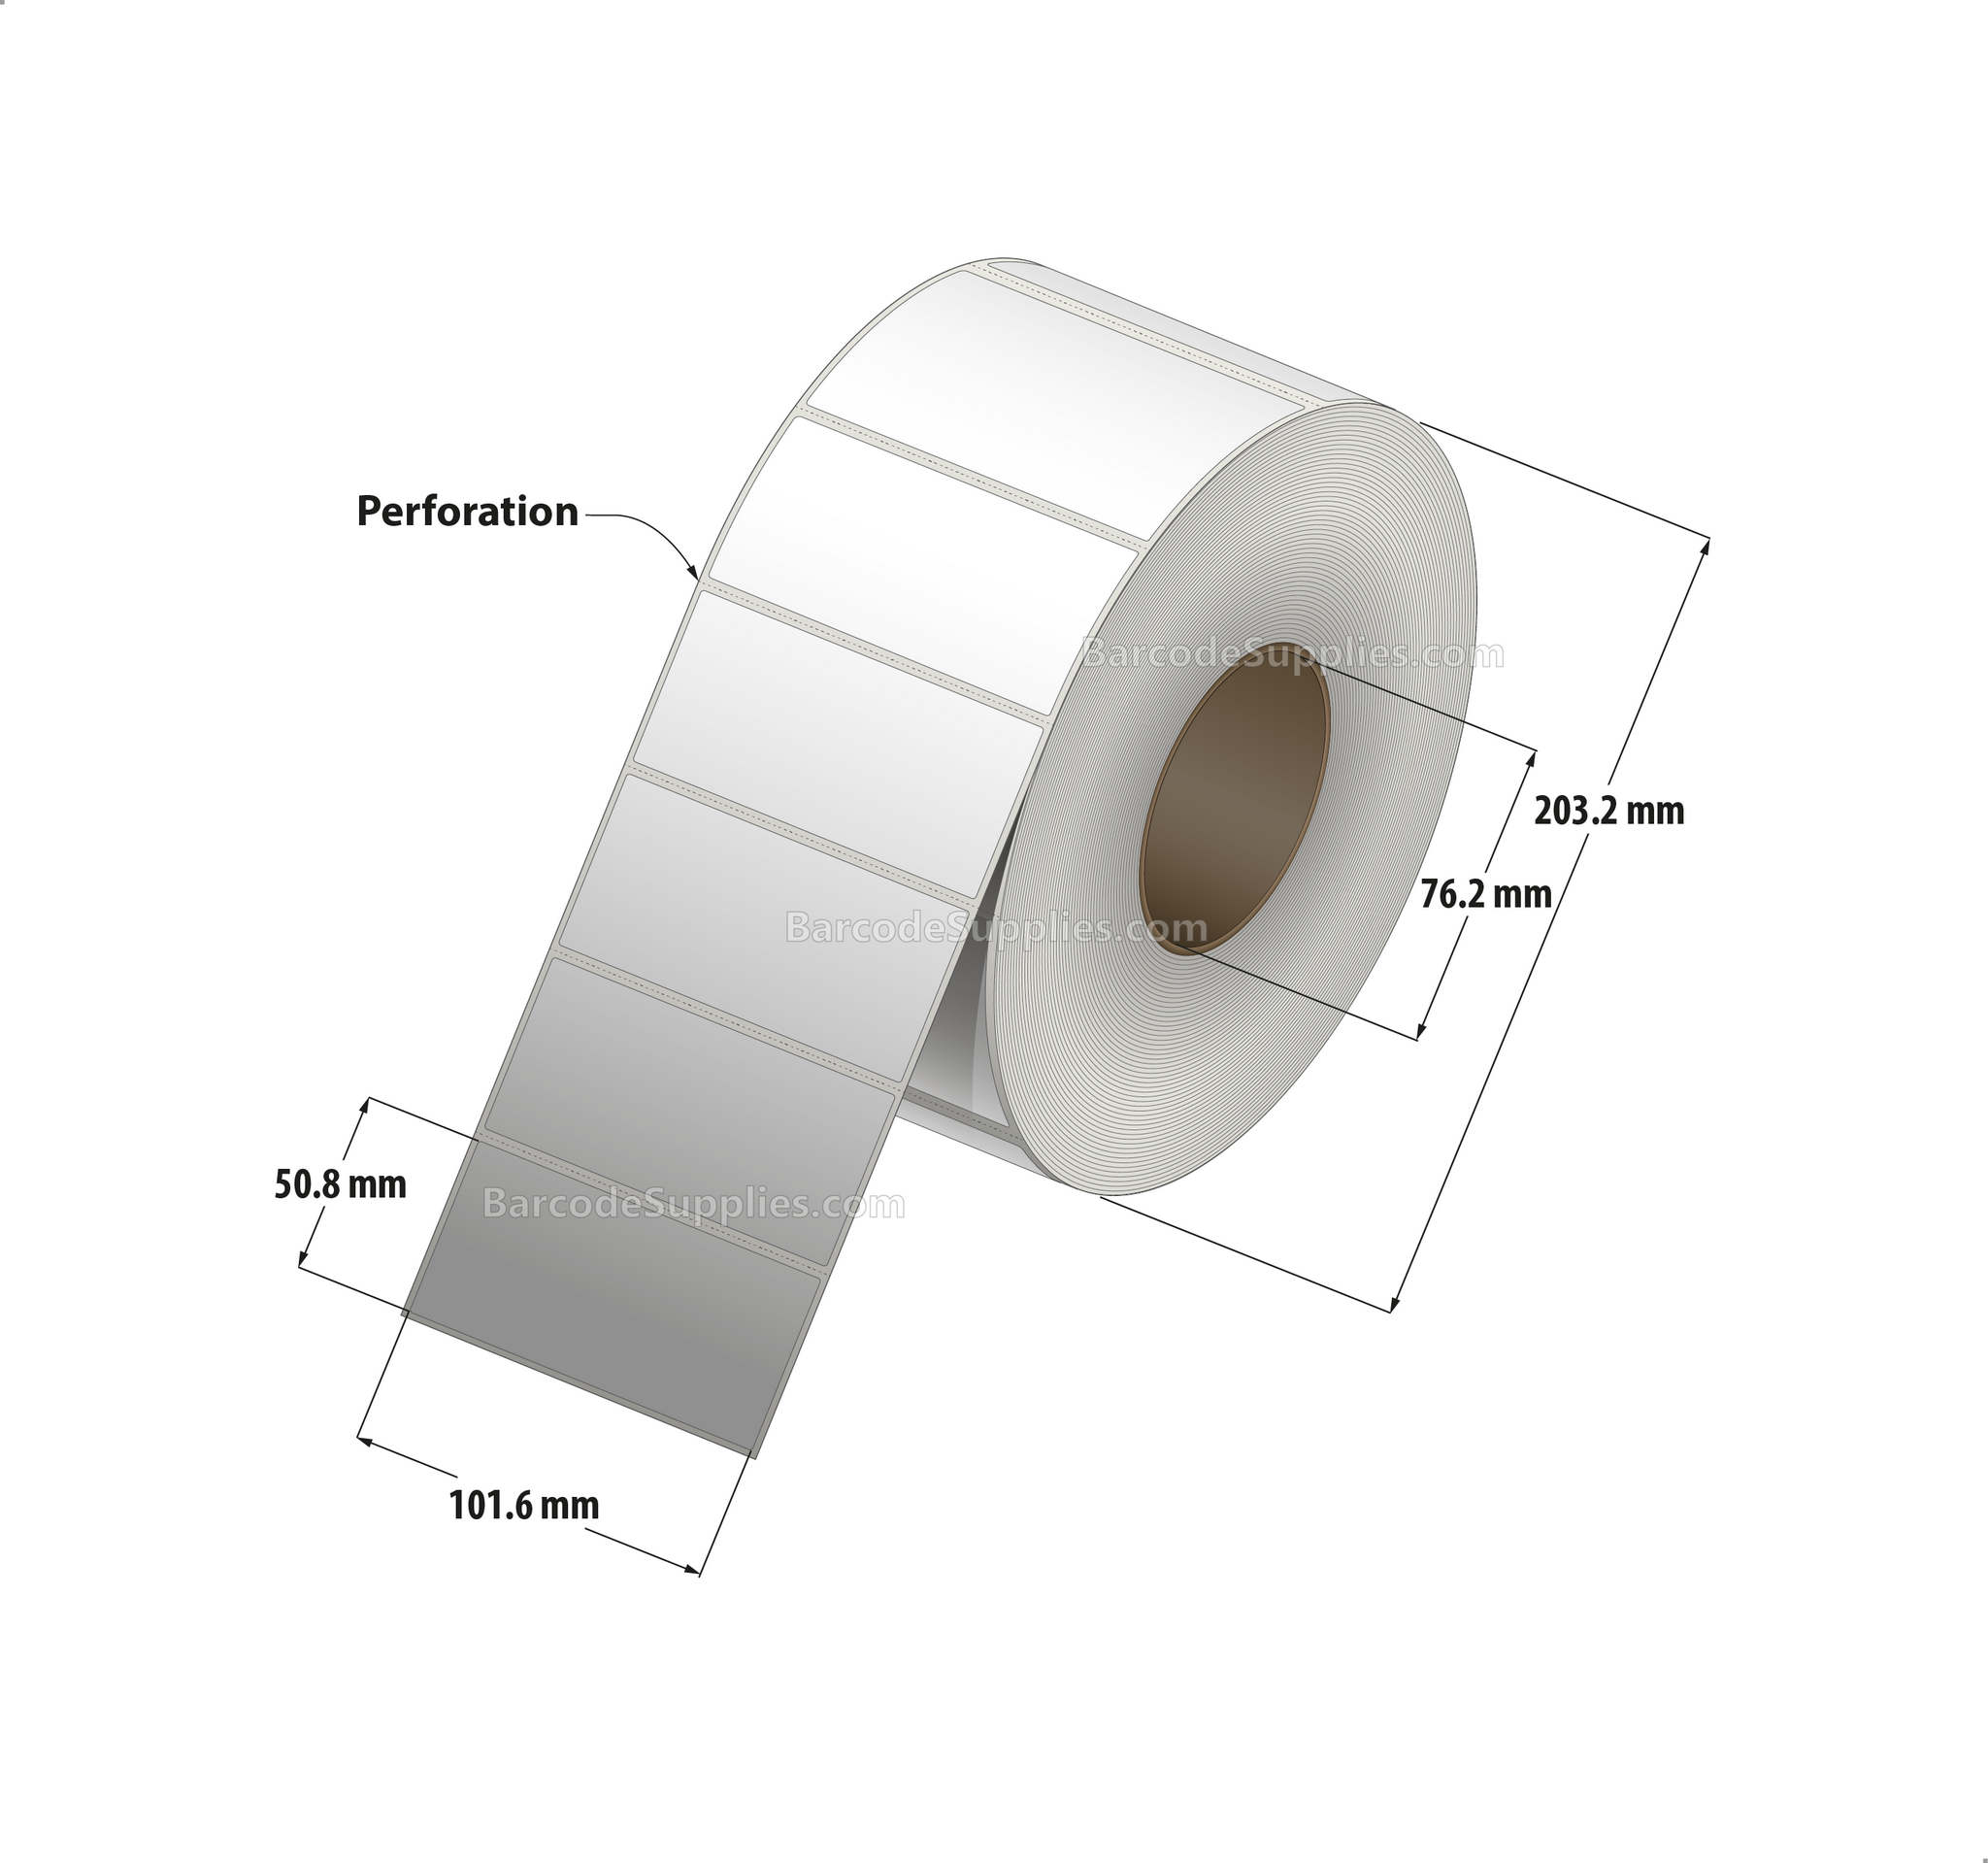 4 x 2 Thermal Transfer White Labels With Removable Adhesive - Perforated - 2900 Labels Per Roll - Carton Of 4 Rolls - 11600 Labels Total - MPN: RE-4-2-2900-3